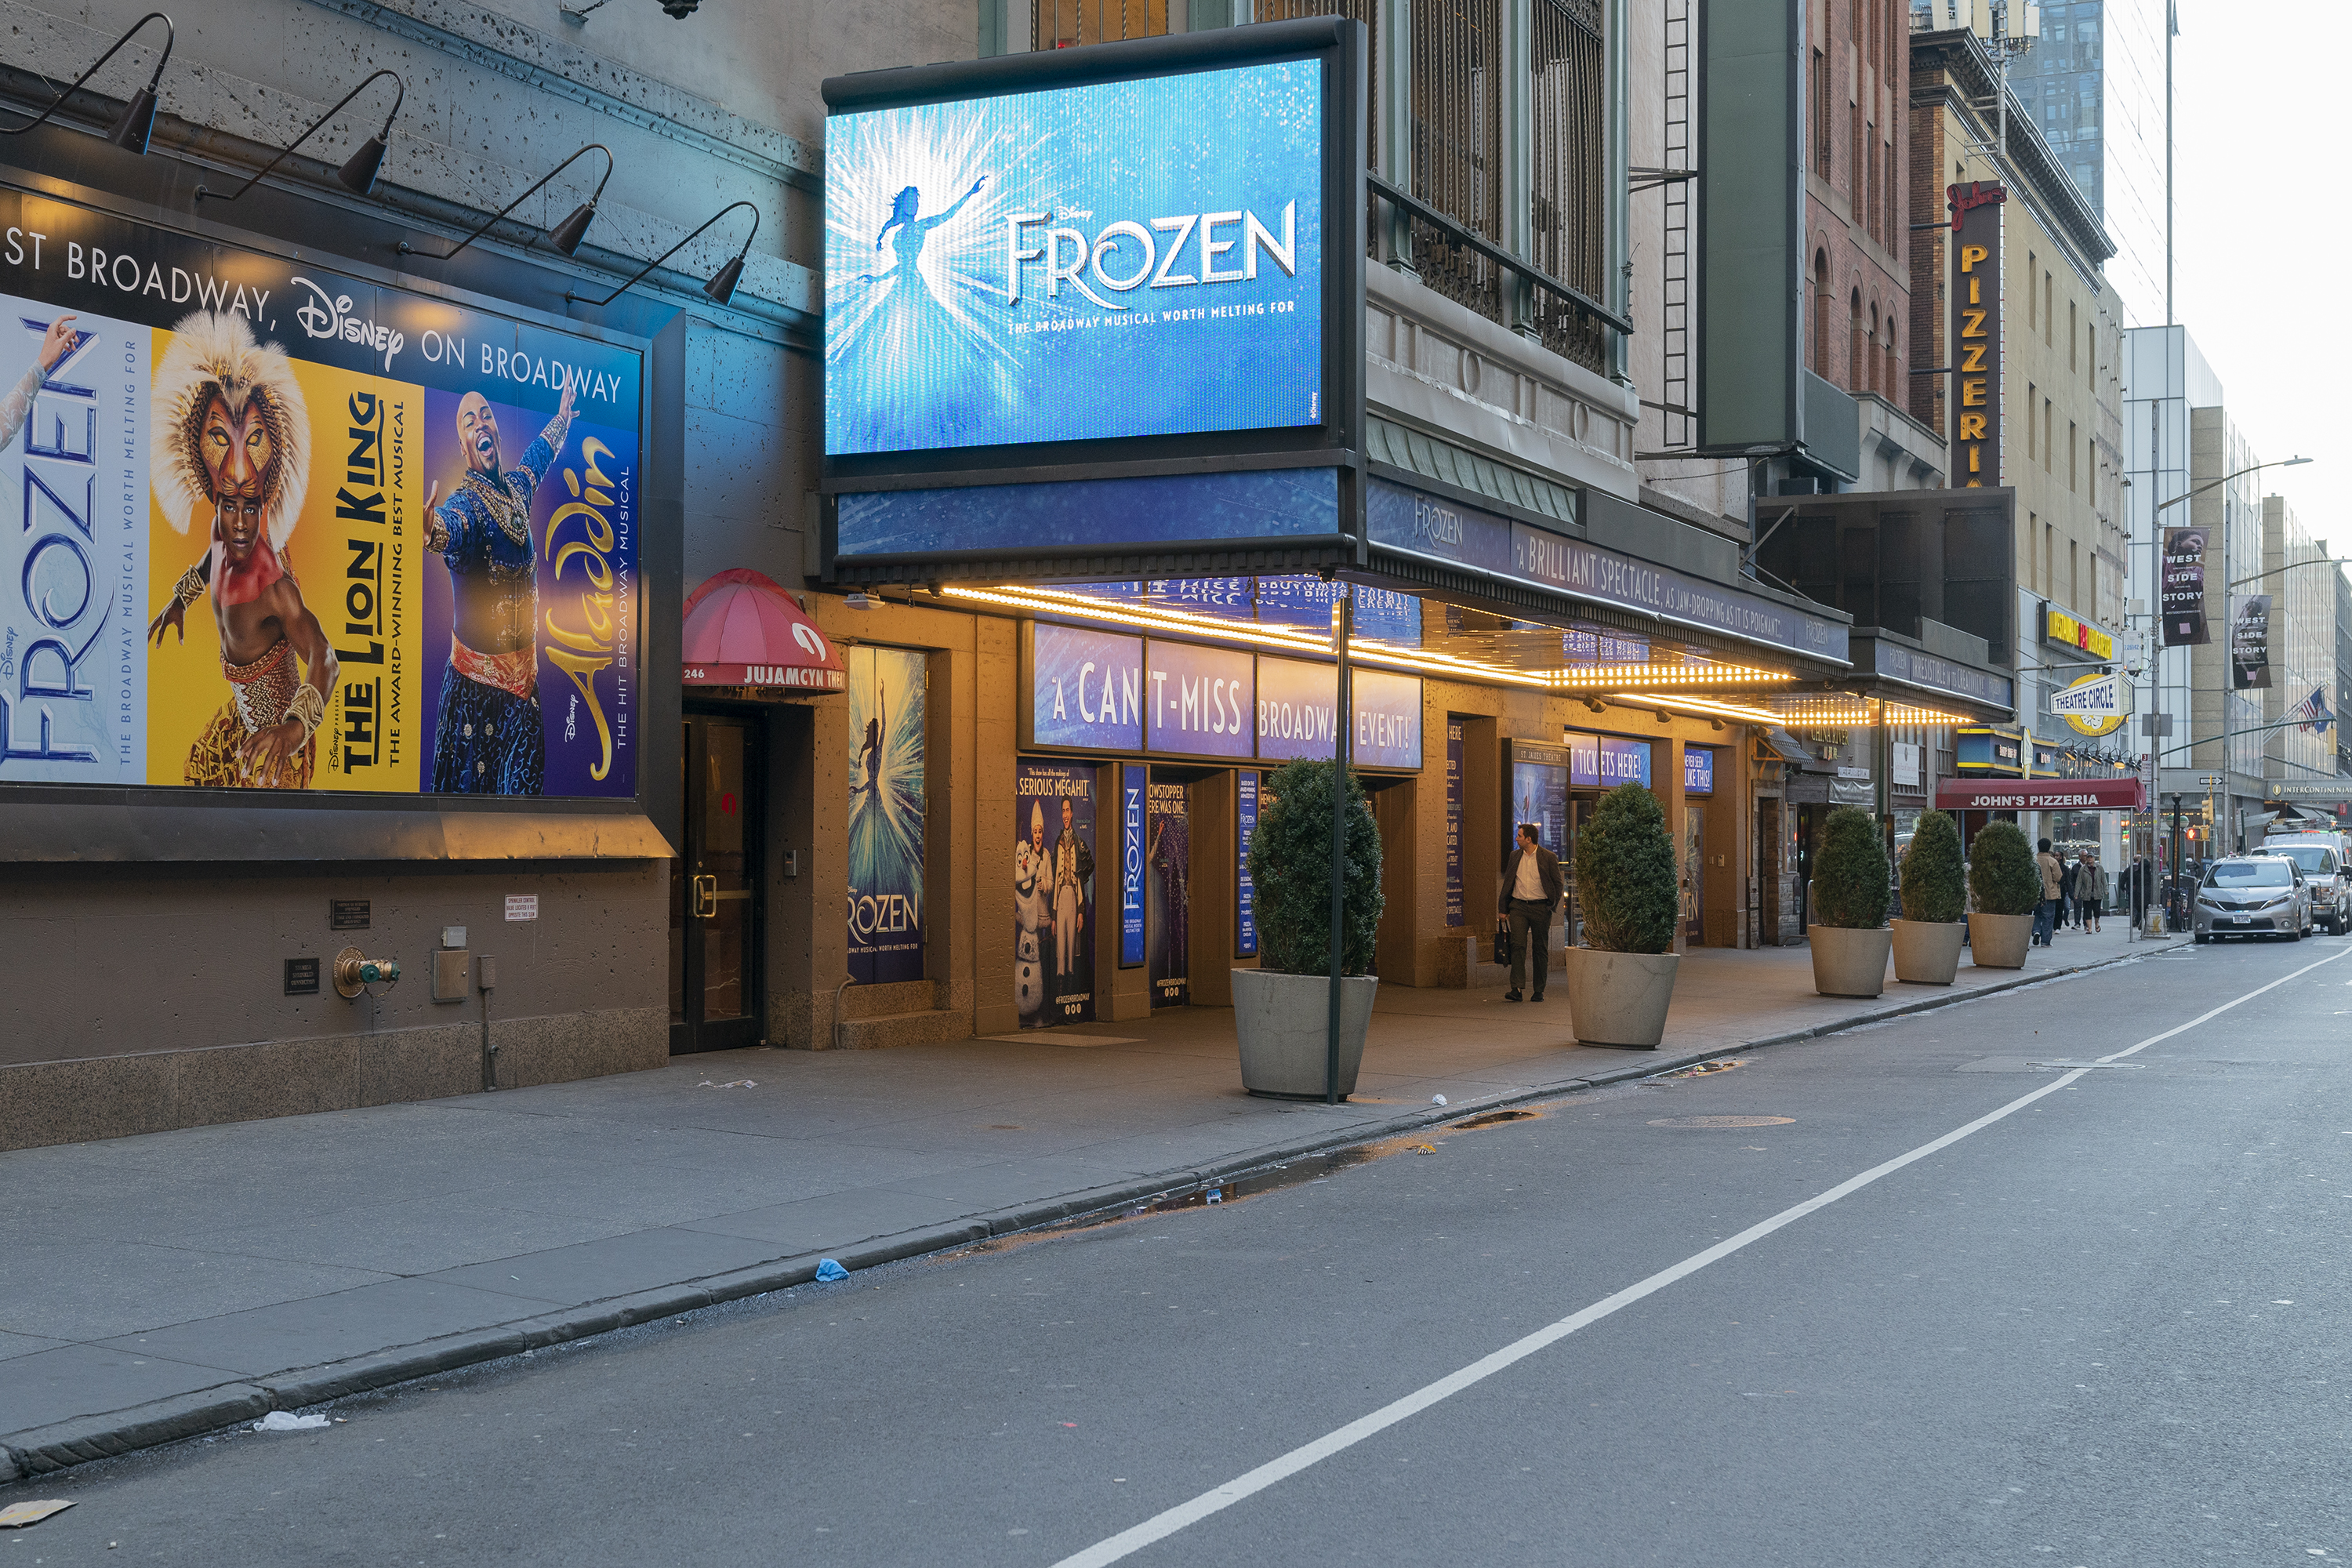 Stopped Cold: ‘Frozen’ Musical on Broadway Not to Reopen